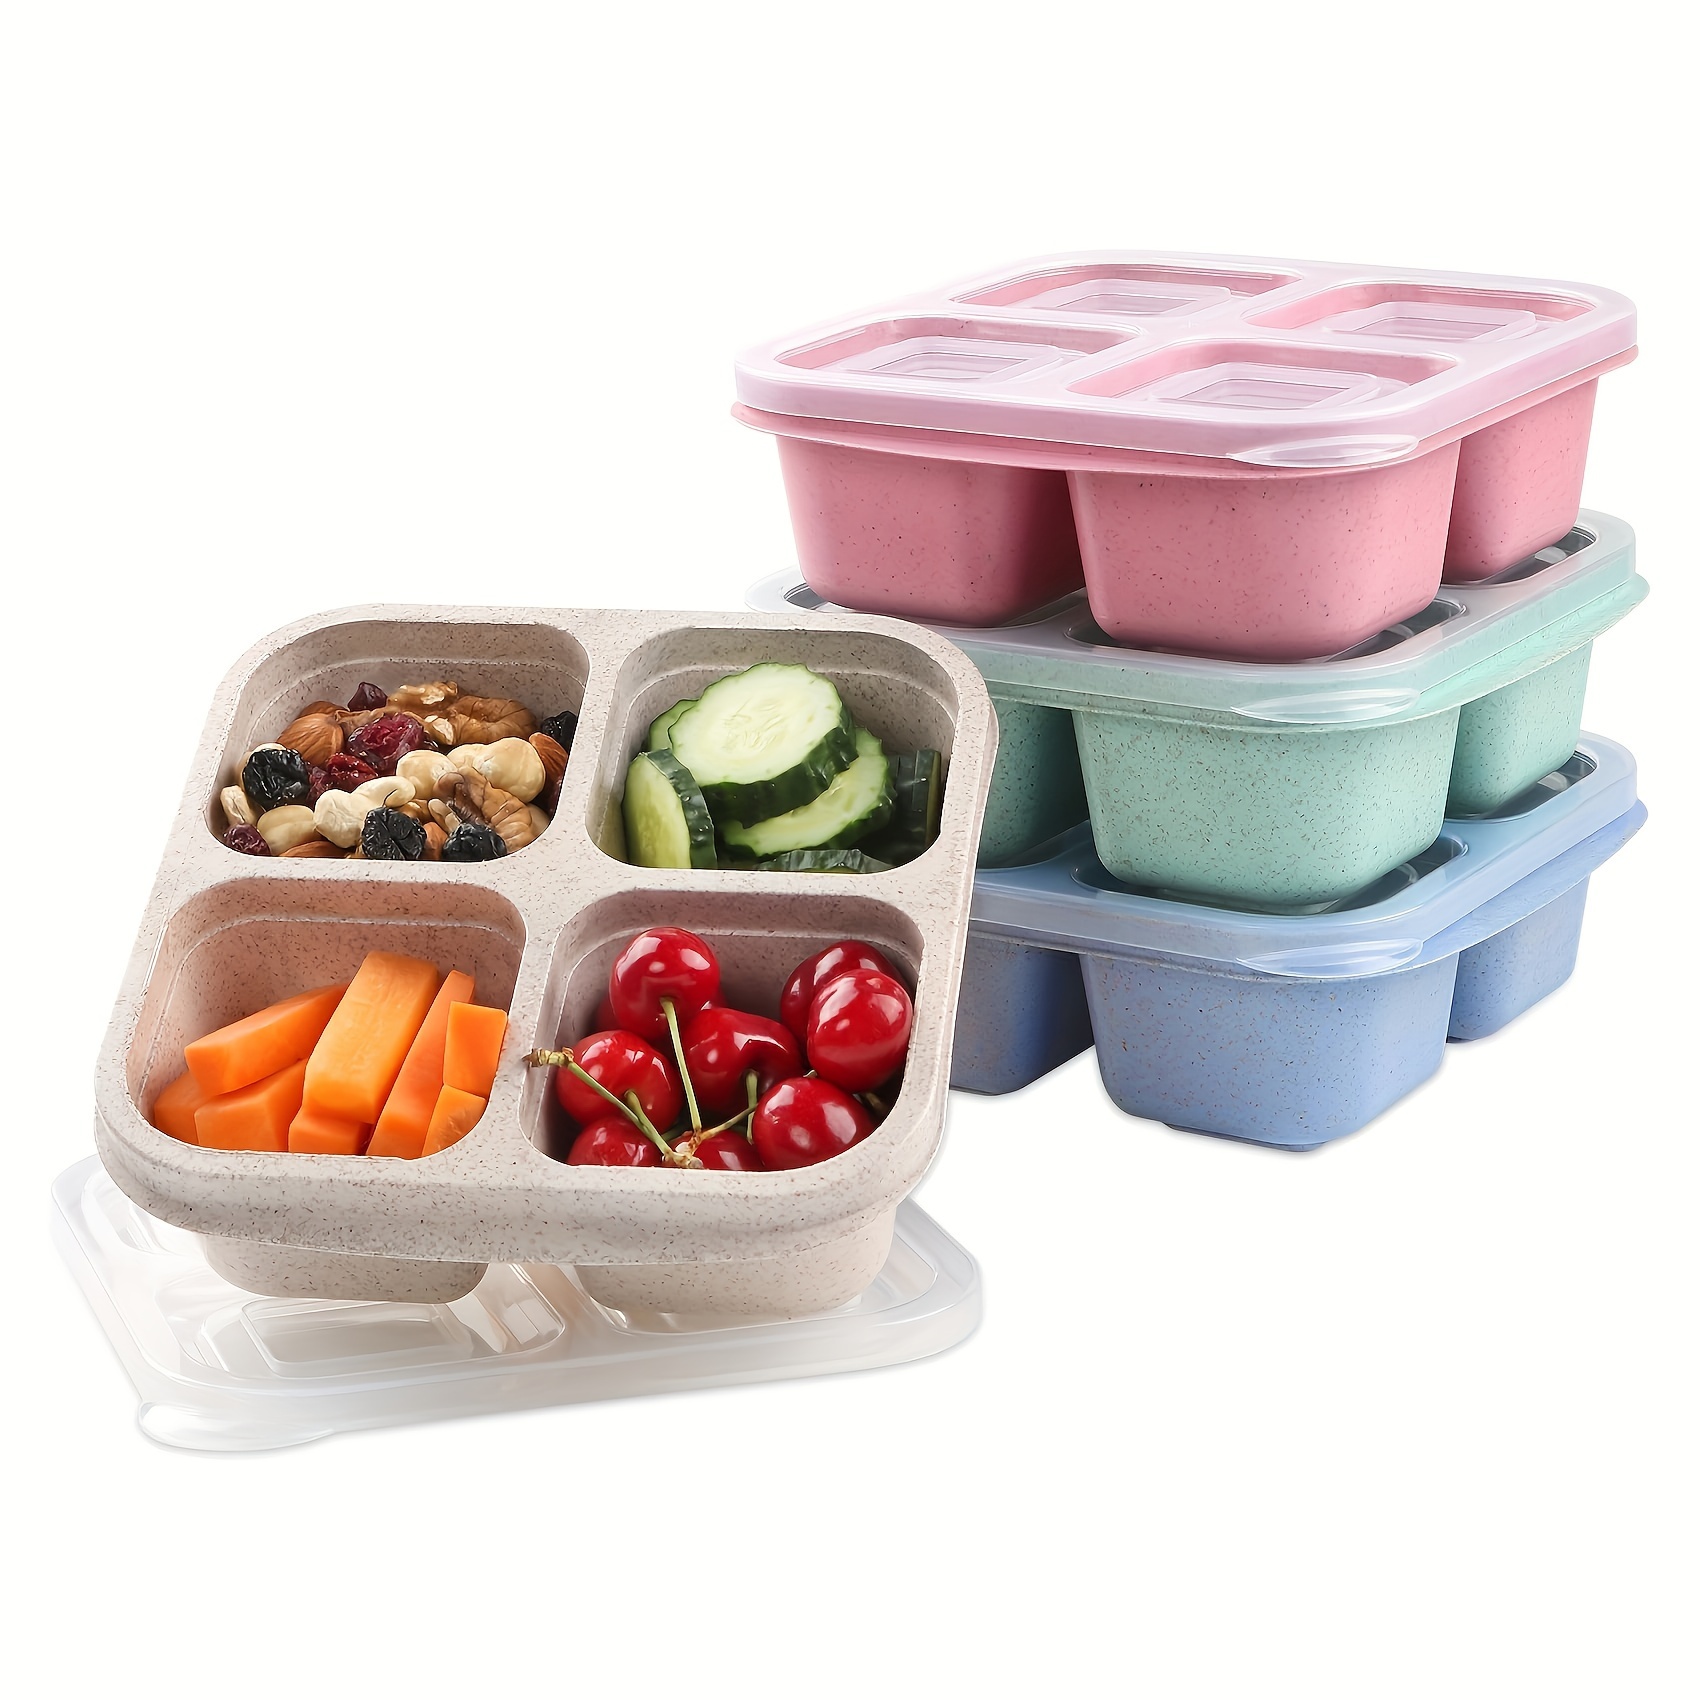 

1pc Snack Containers, Divided Bento Lunch Box With Transparent Lids, Reusable Meal Prep Lunch Containers For Adults, No Bpa, 4 Compartment Food Storage Containers For People Work Travel